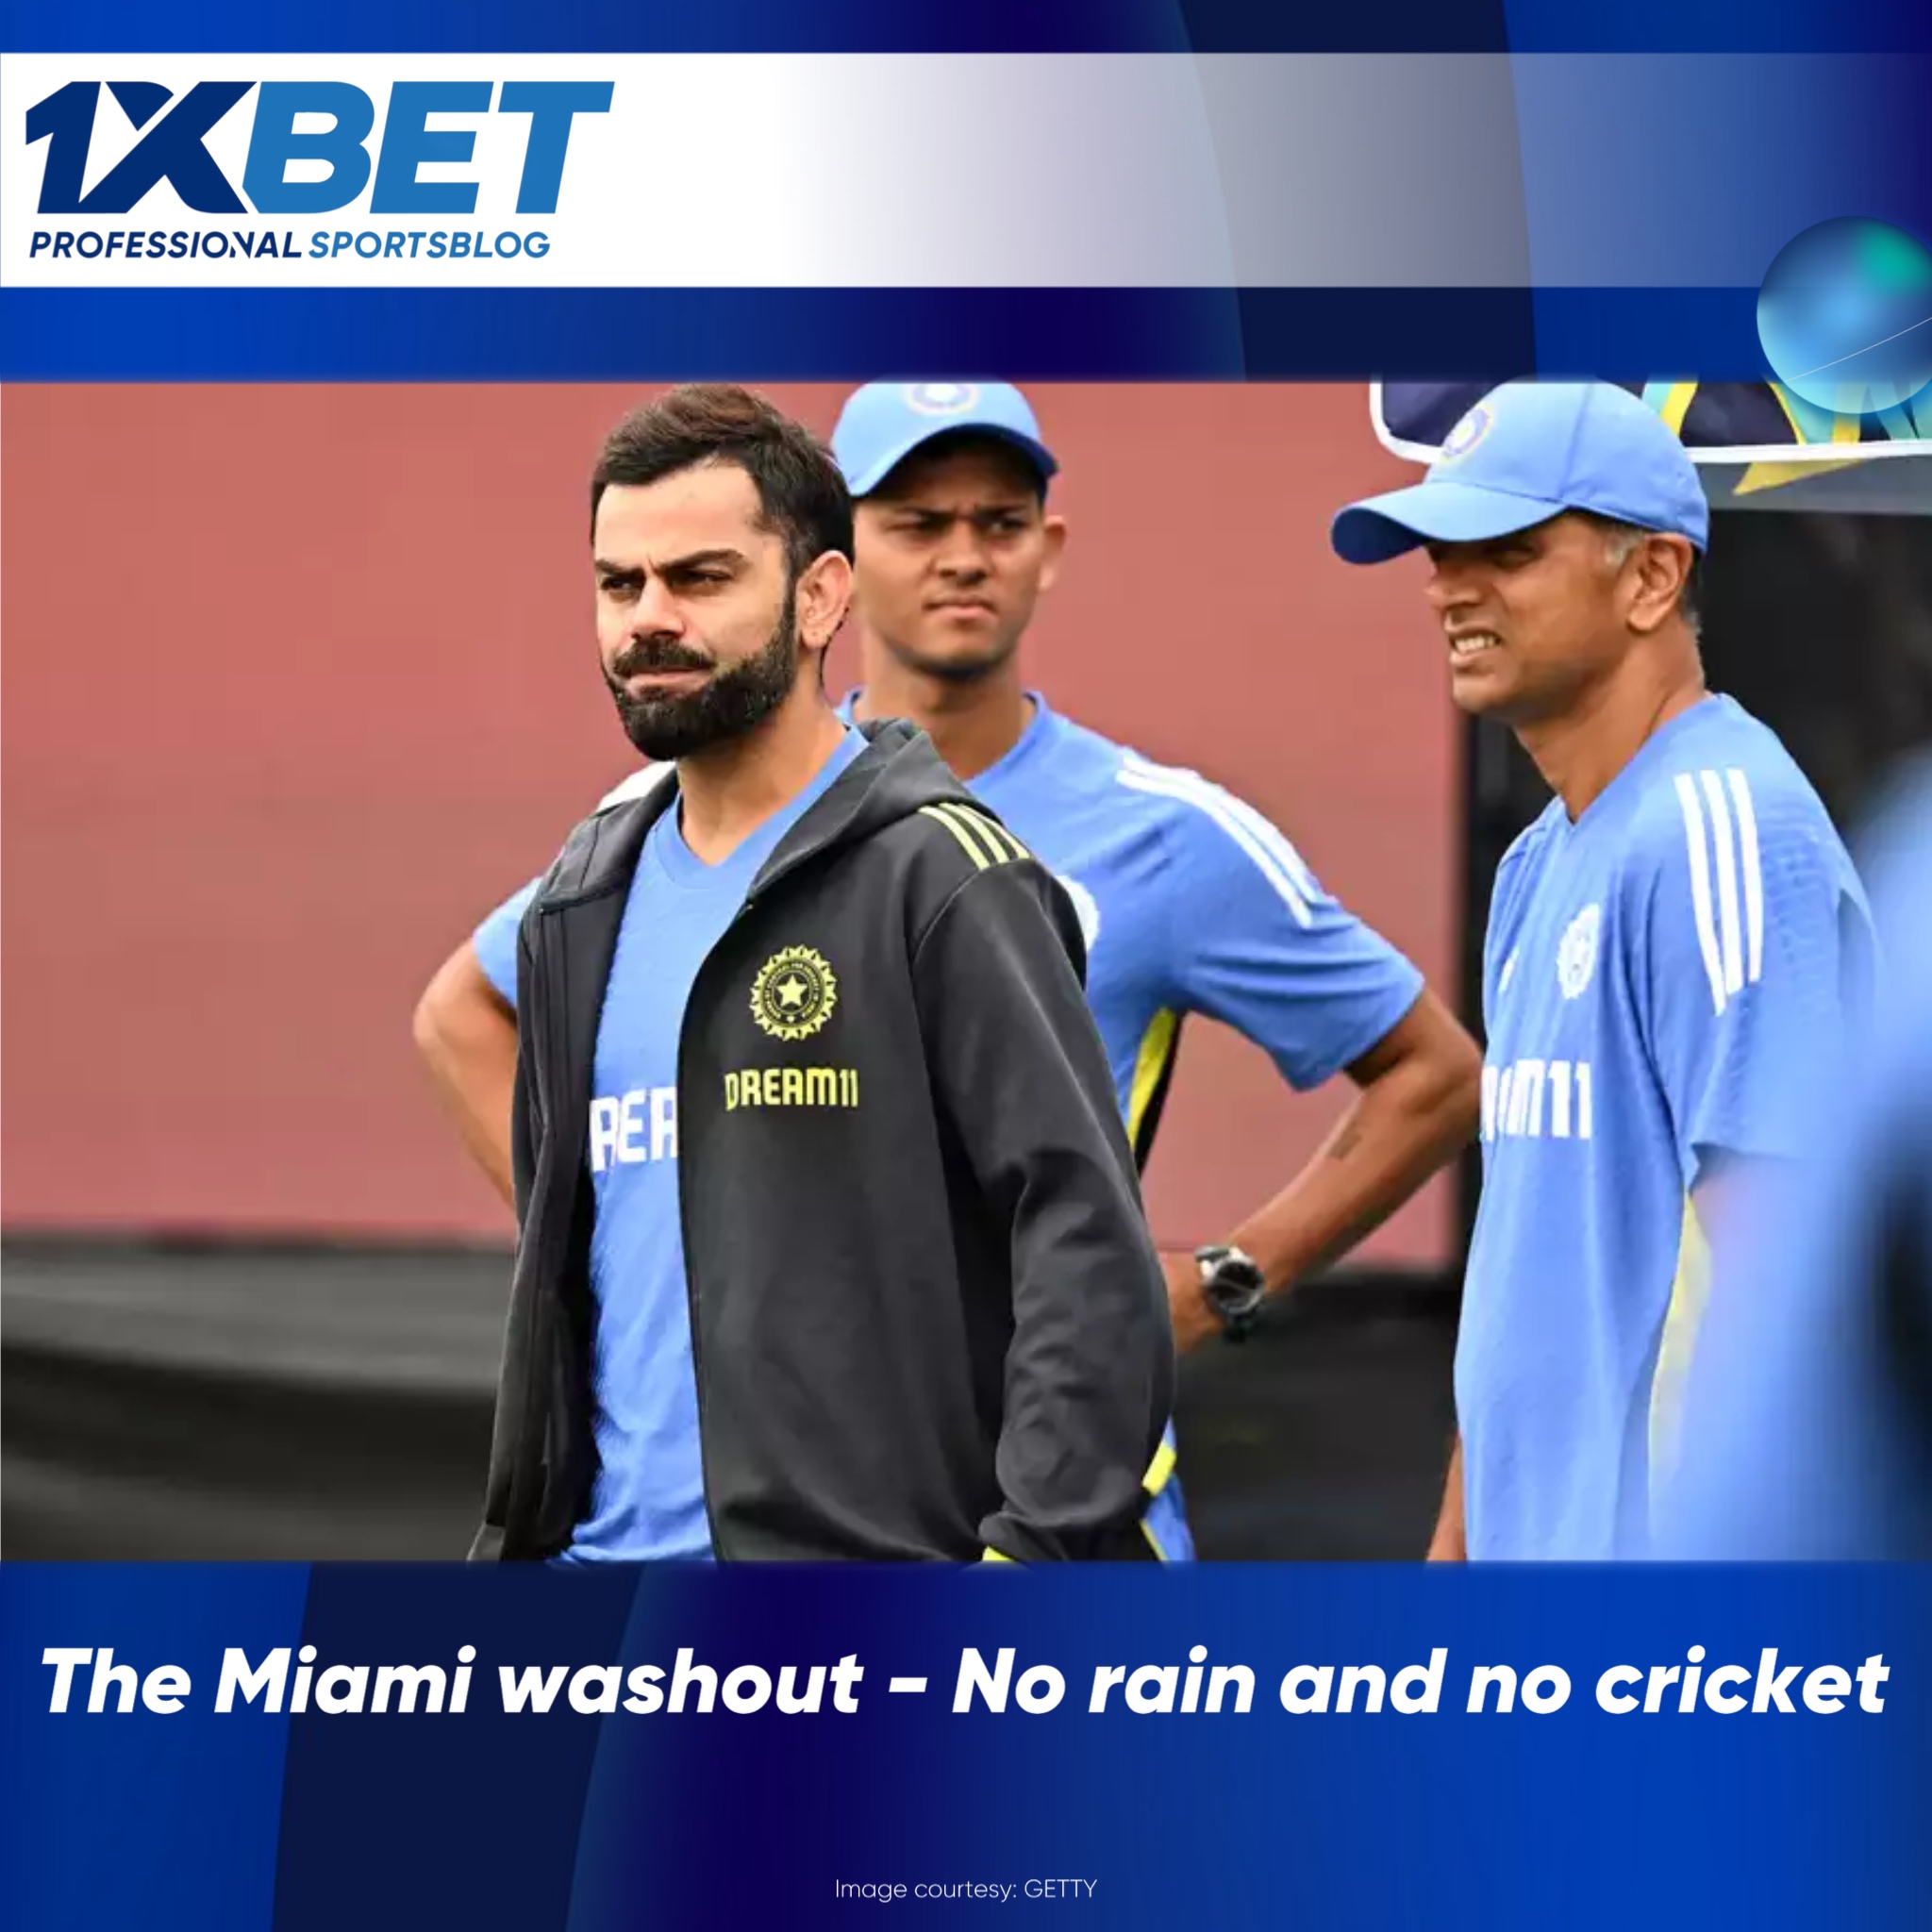 Rain-Free Day in Miami Leads to T20 World Cup Matches Abandonment: Safety Concerns and Player Disappointment